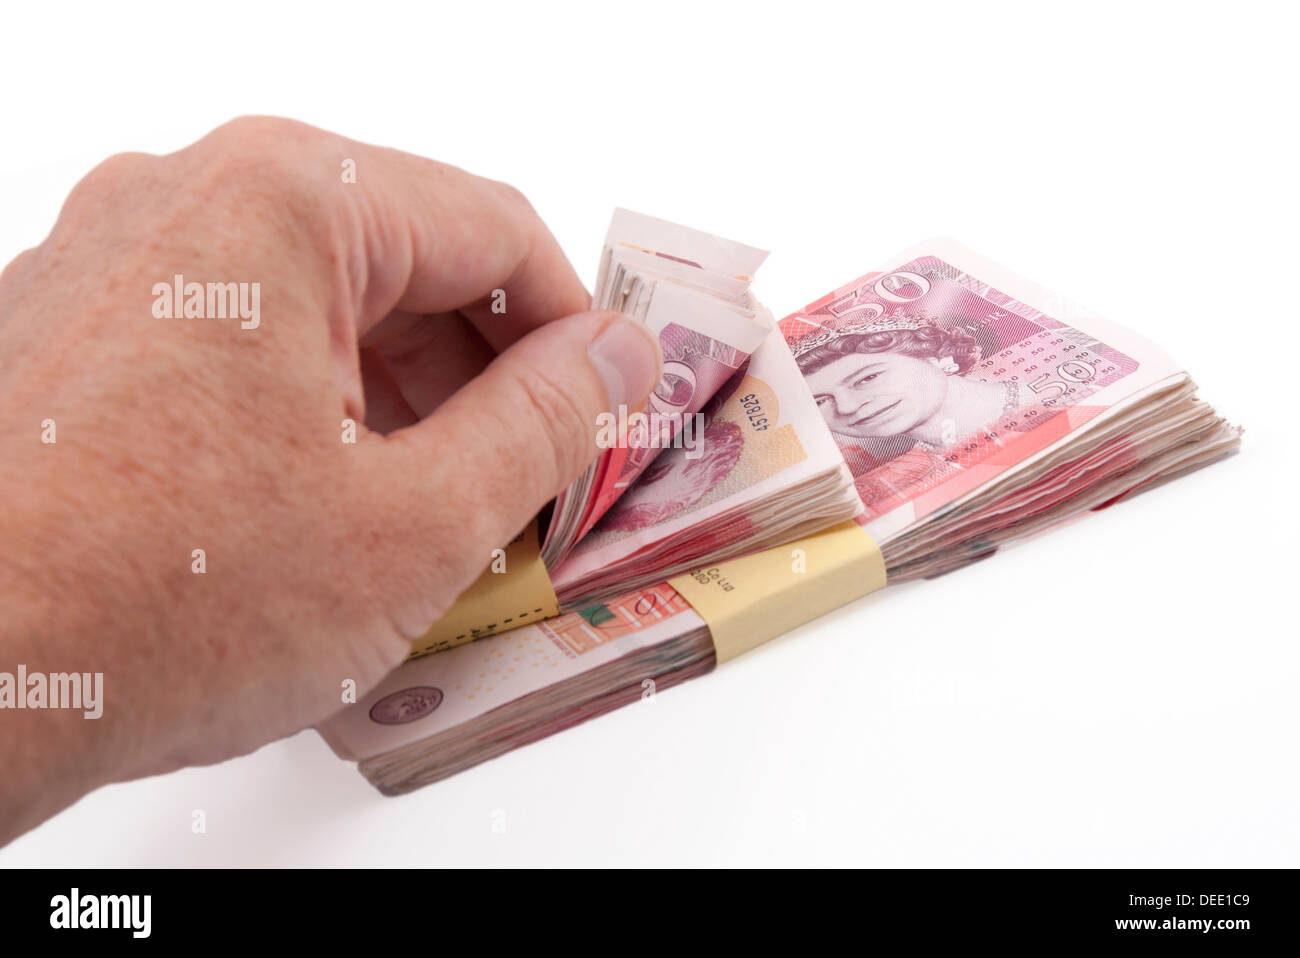 counting fifty pound notes Stock Photo